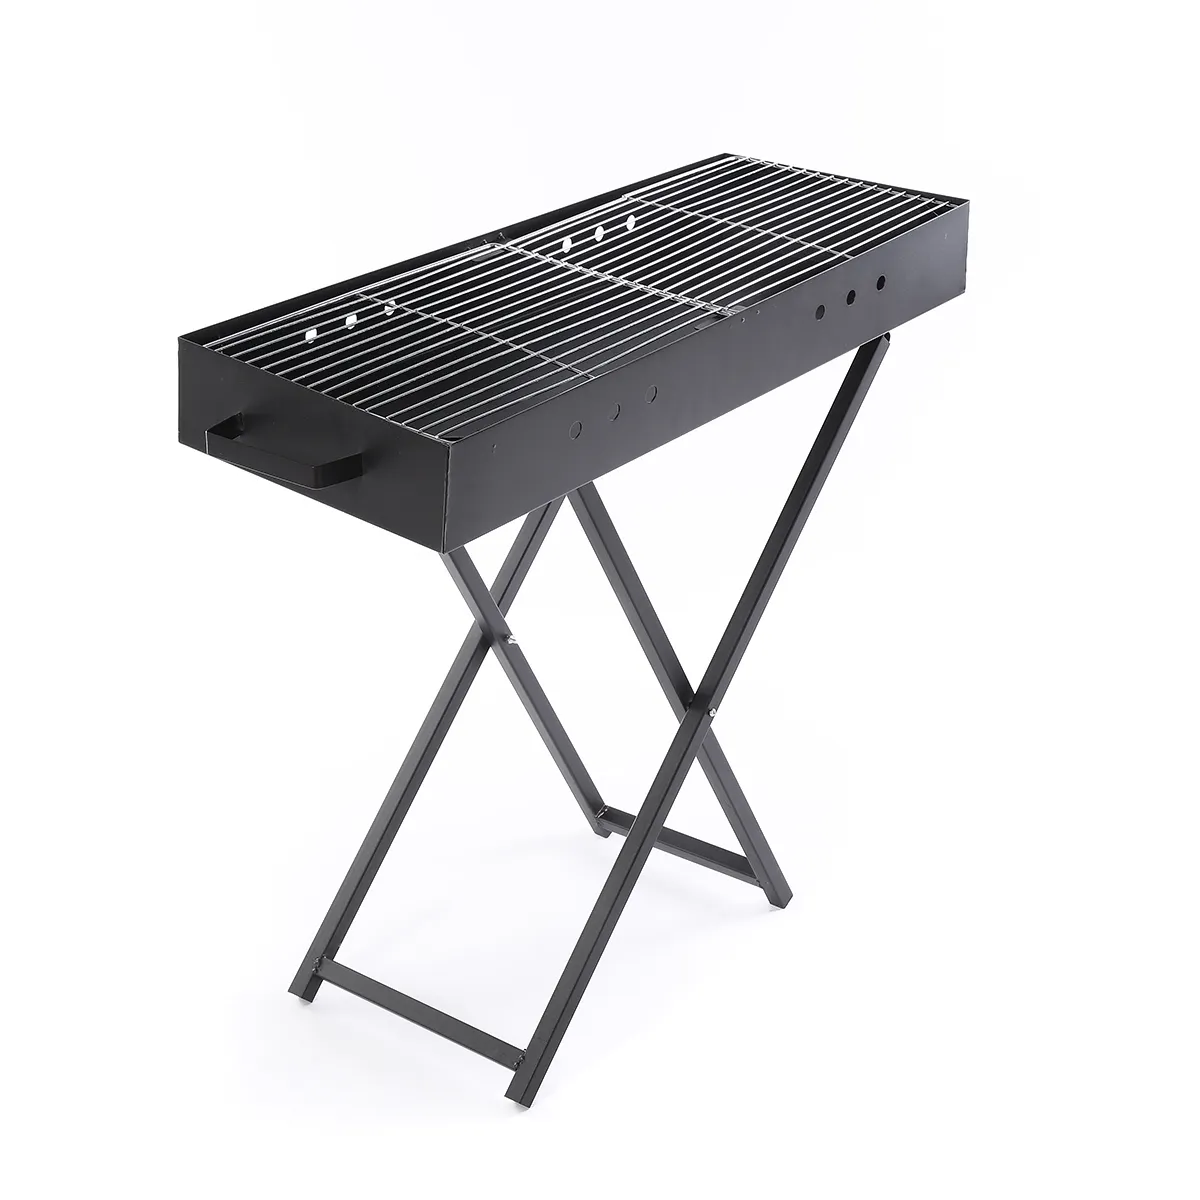 Portable 3-5 Person Stand Stainless Steel Folding Outdoor Camping BBQ Grill Gas-Fueled Foldable Charcoal Grill for Easy Taking